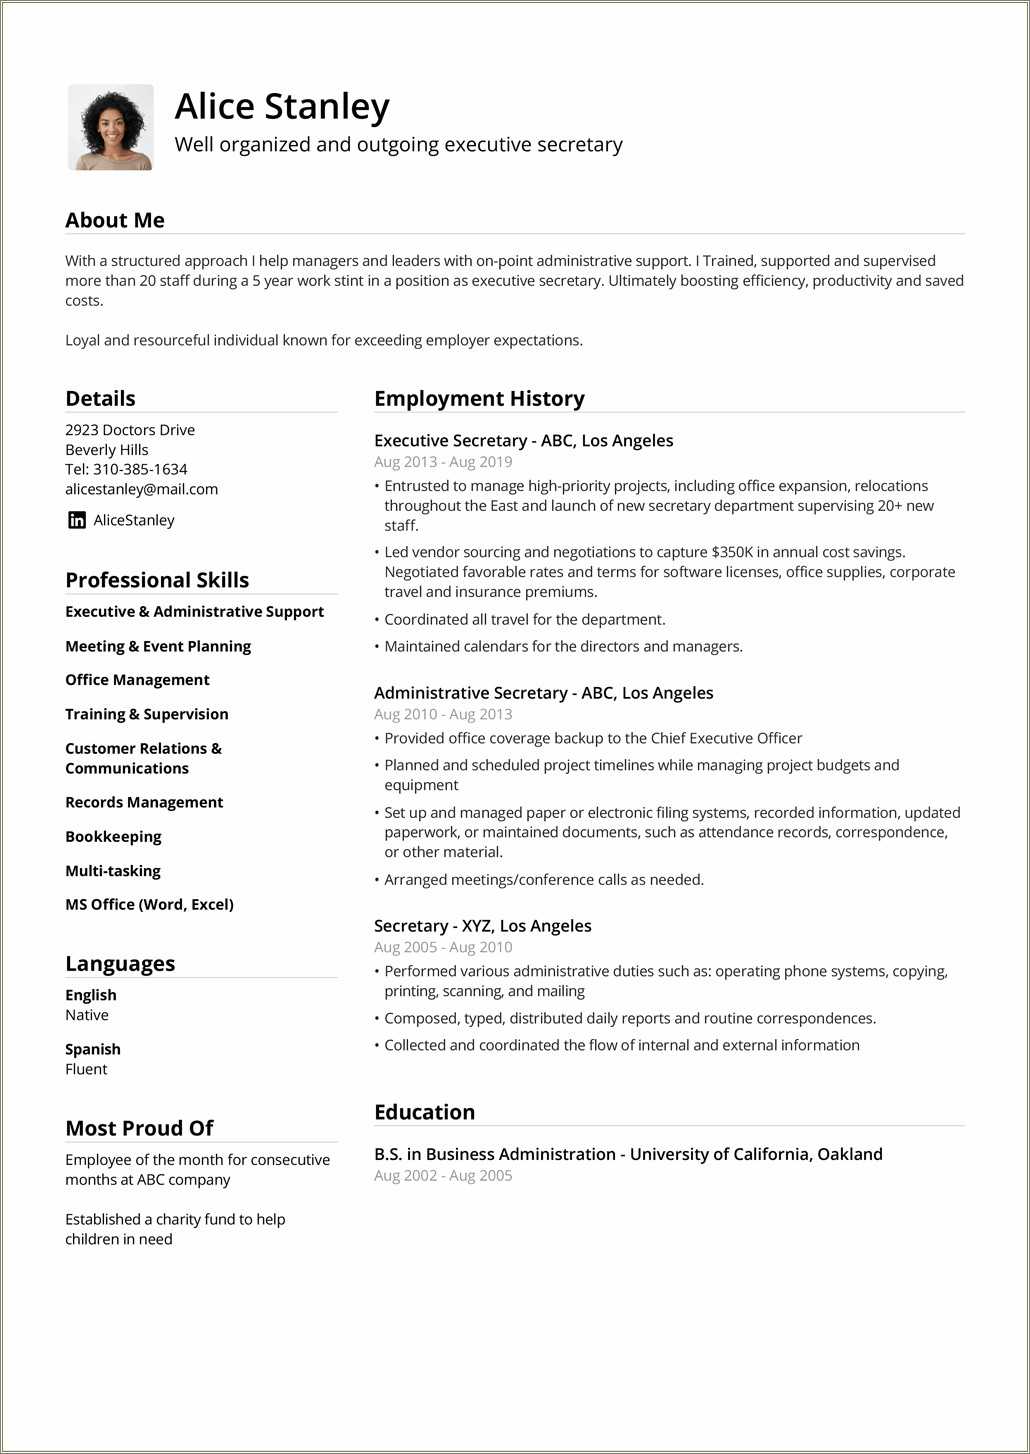 blank-resume-format-for-job-resume-example-gallery